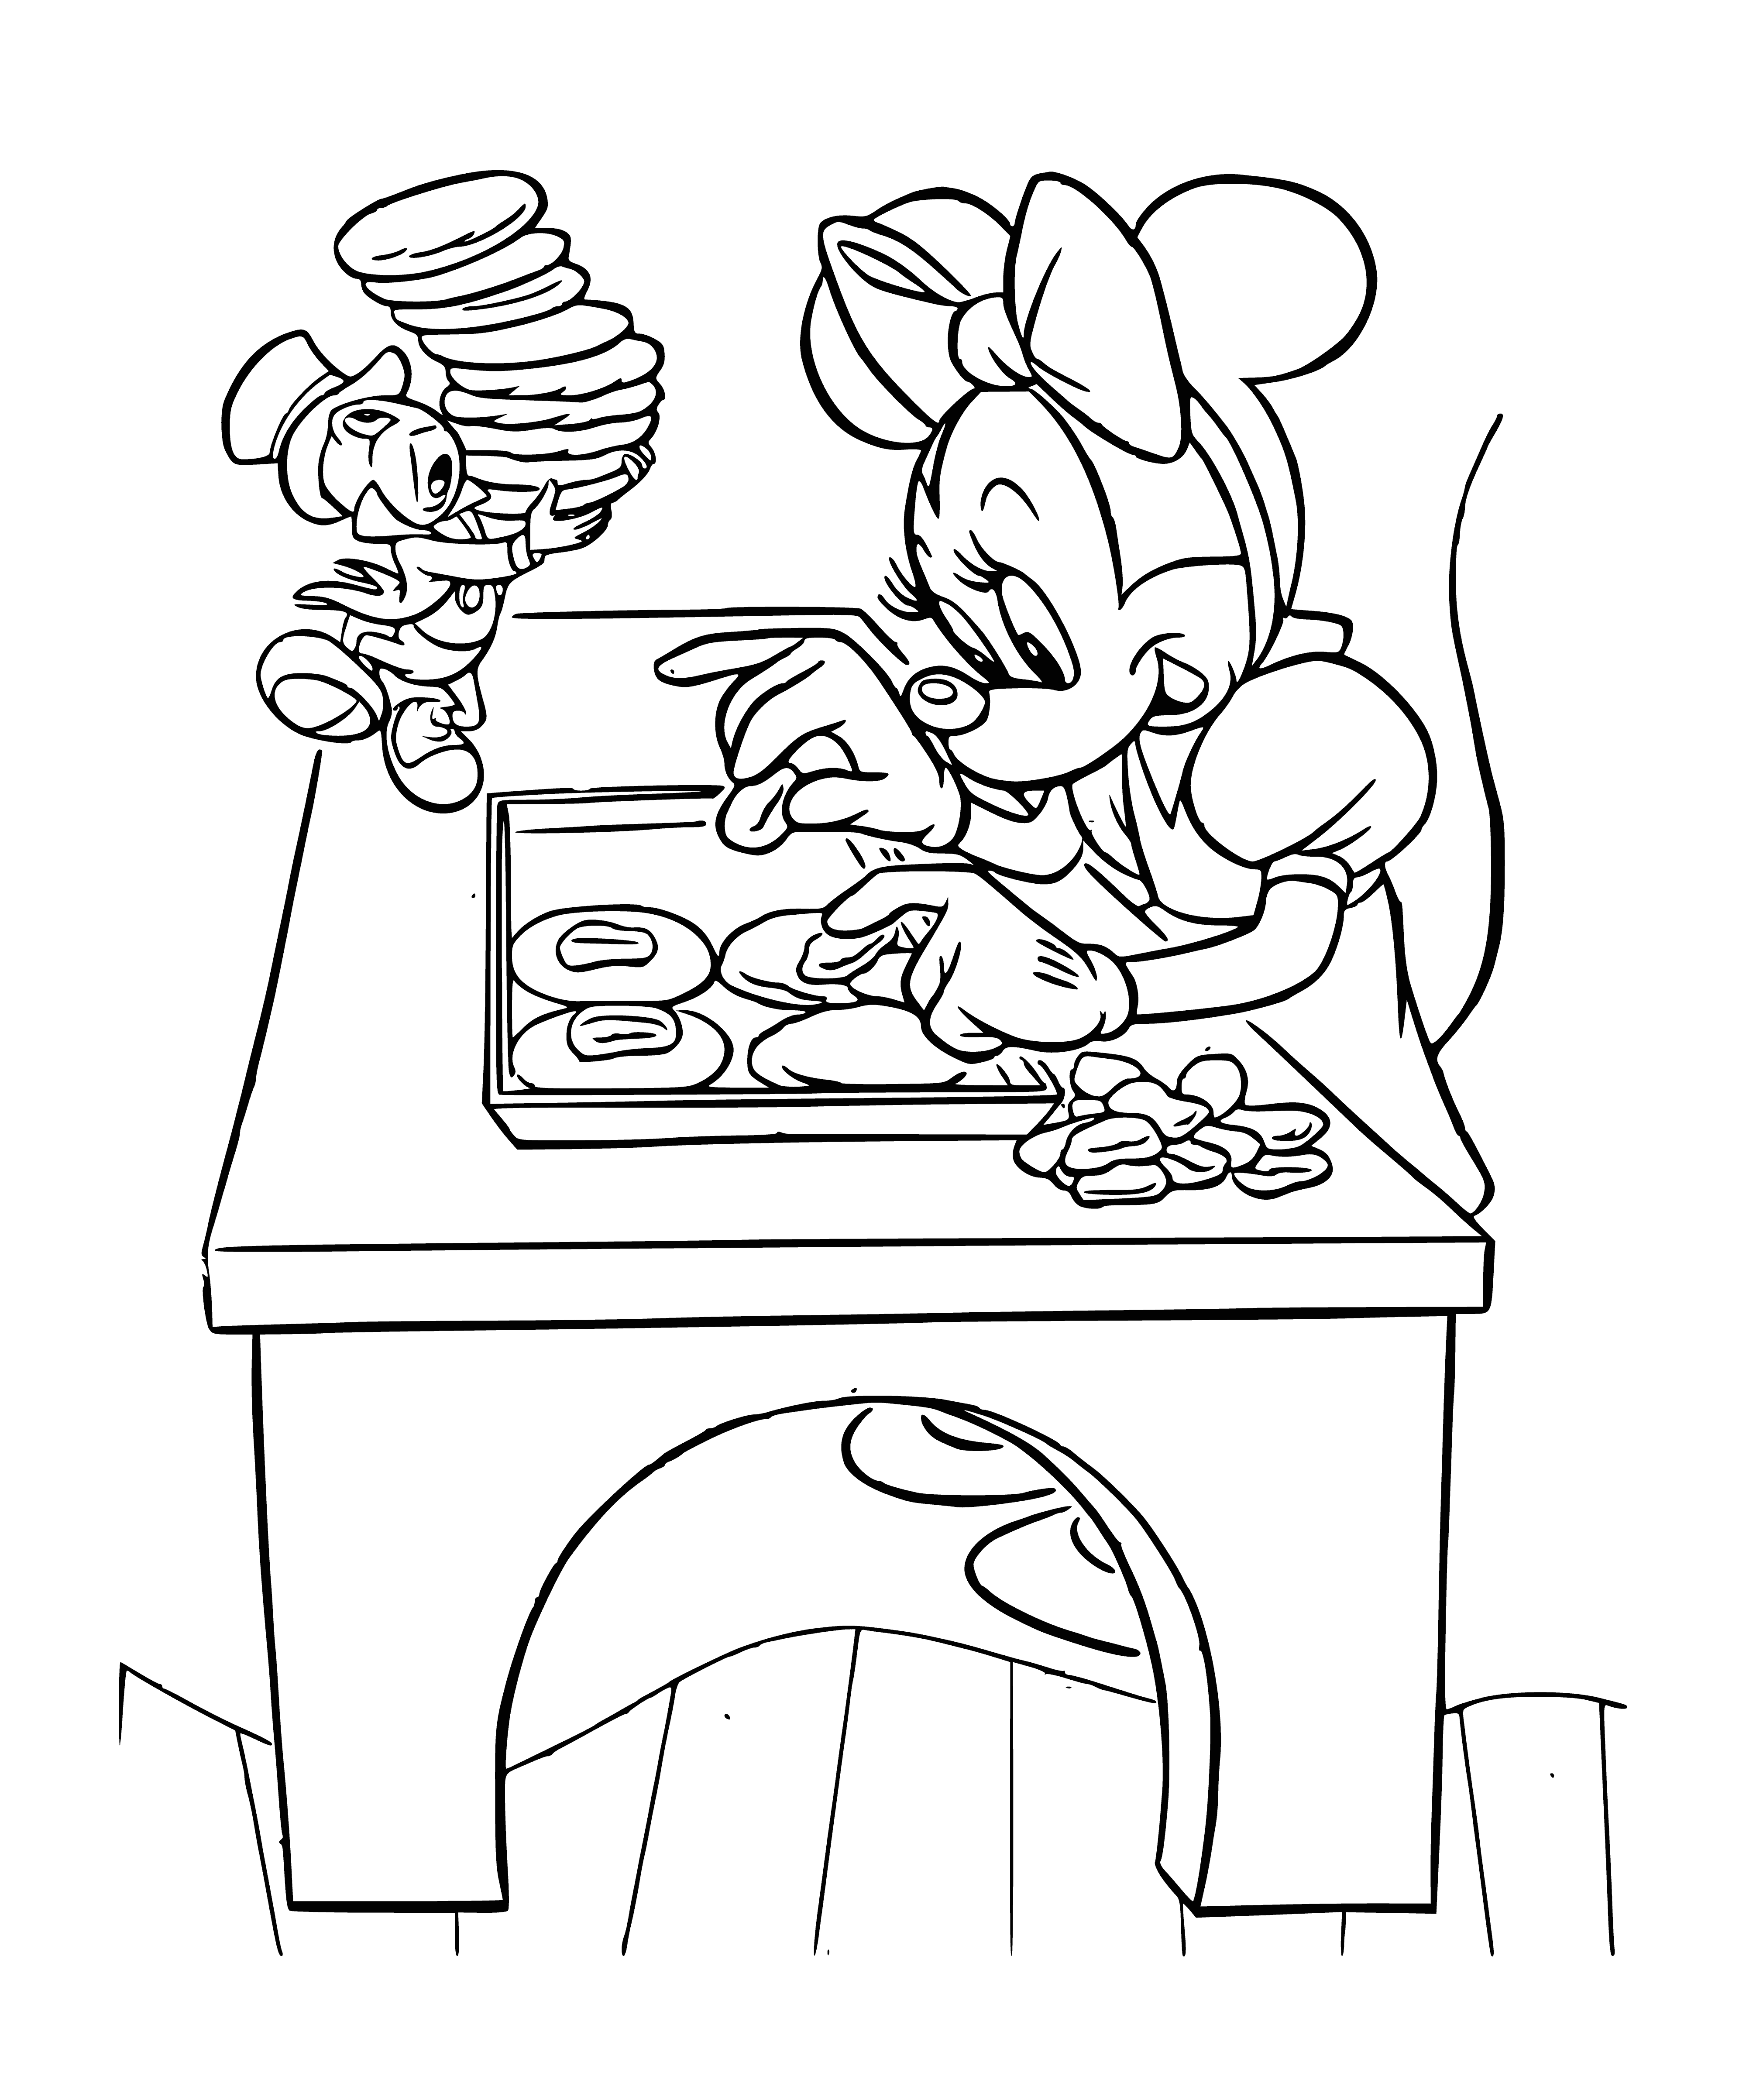 Biscuits coloring page